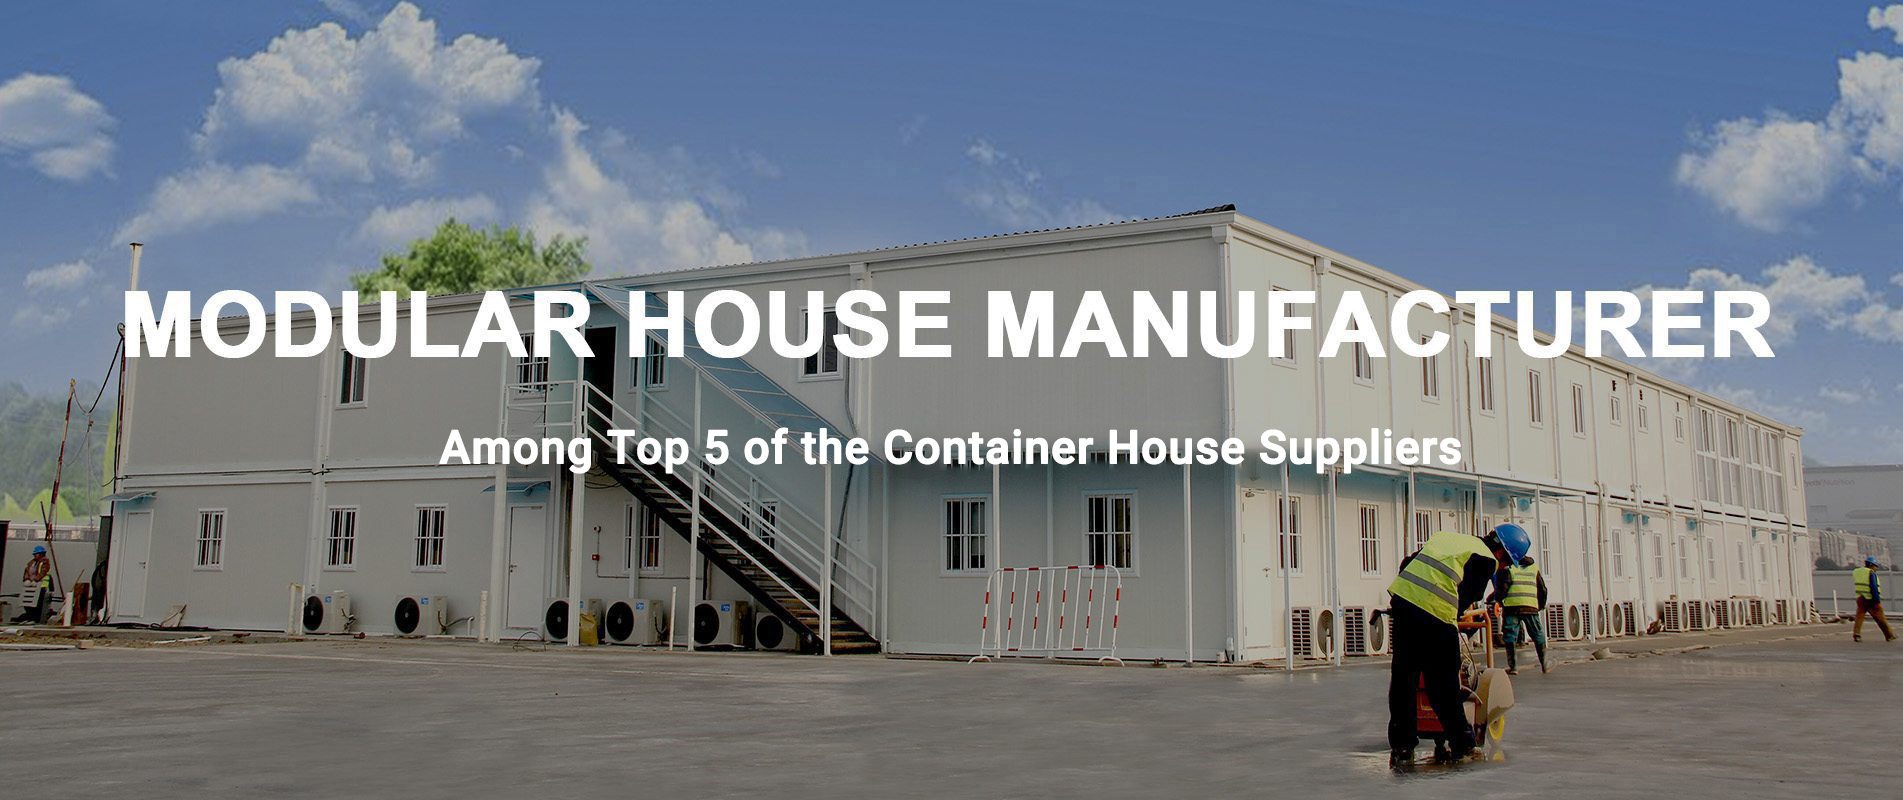 to be No.1 brand of container house